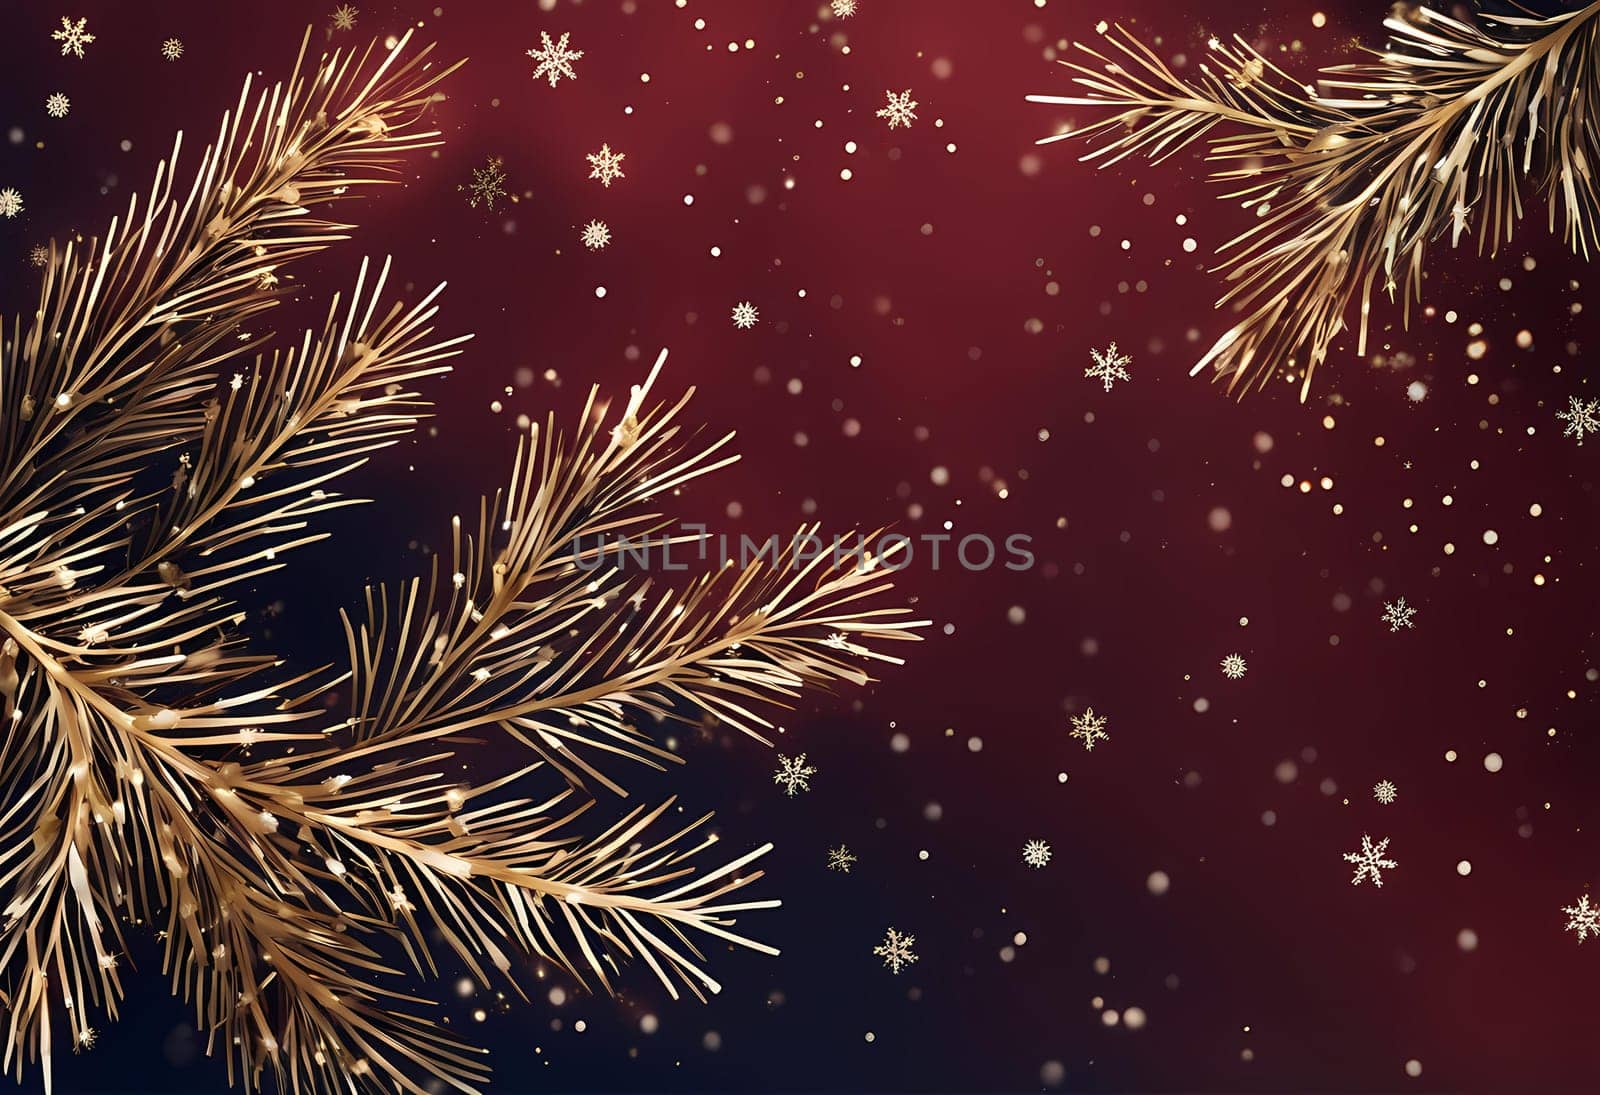 Winter background with pine branches on a dark red background. Gold stars and white, shiny snowflakes by rostik924